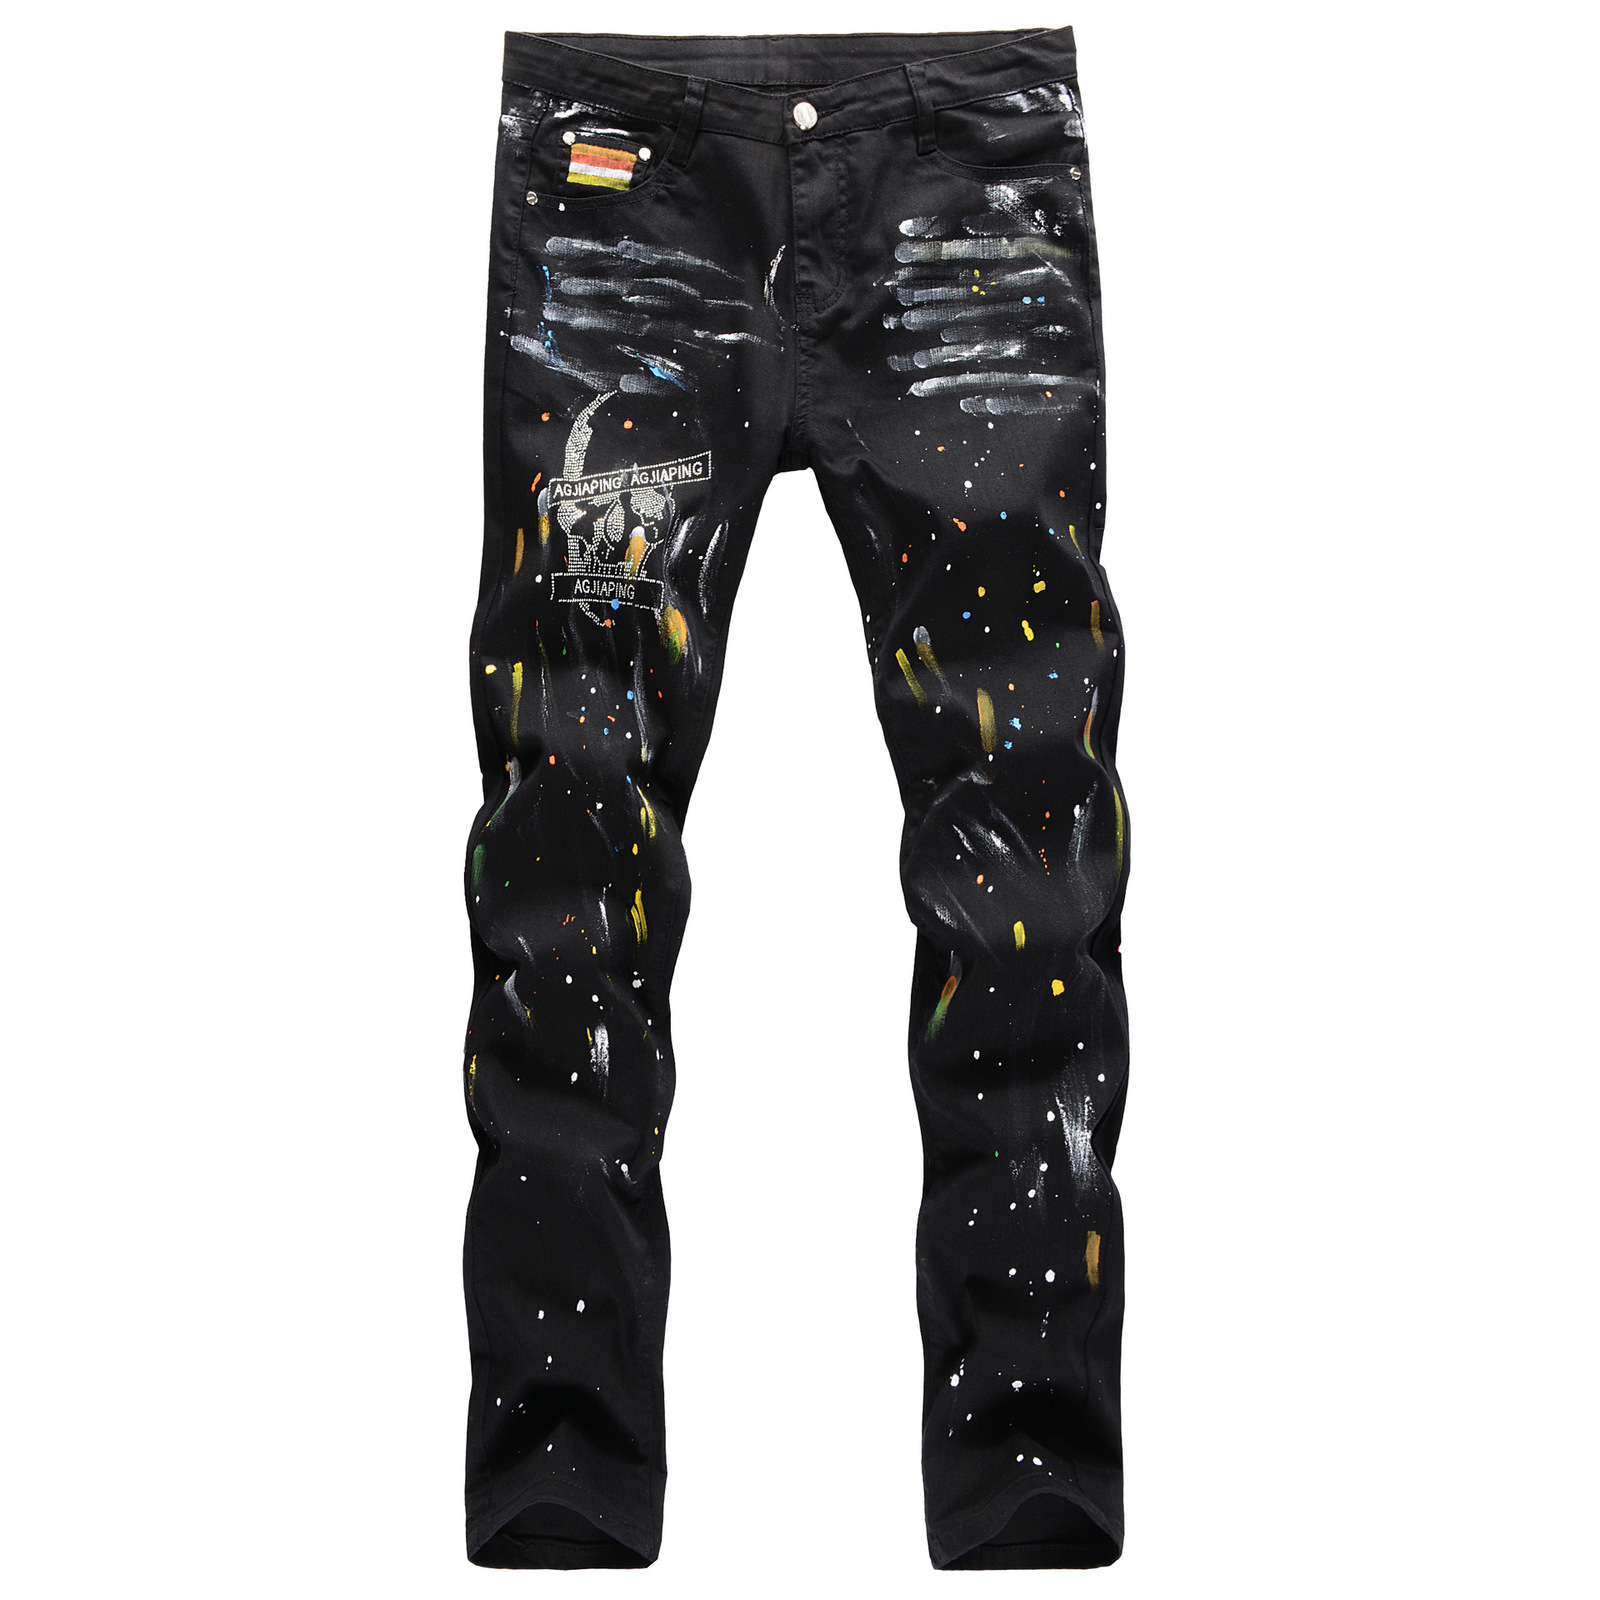 

2021 New Trousers European American Street Hip-hop Style Hand-painted Cat Whiskers Splash Ink Color Paint Skull Straight Jeans Pants 5qx4, Beige